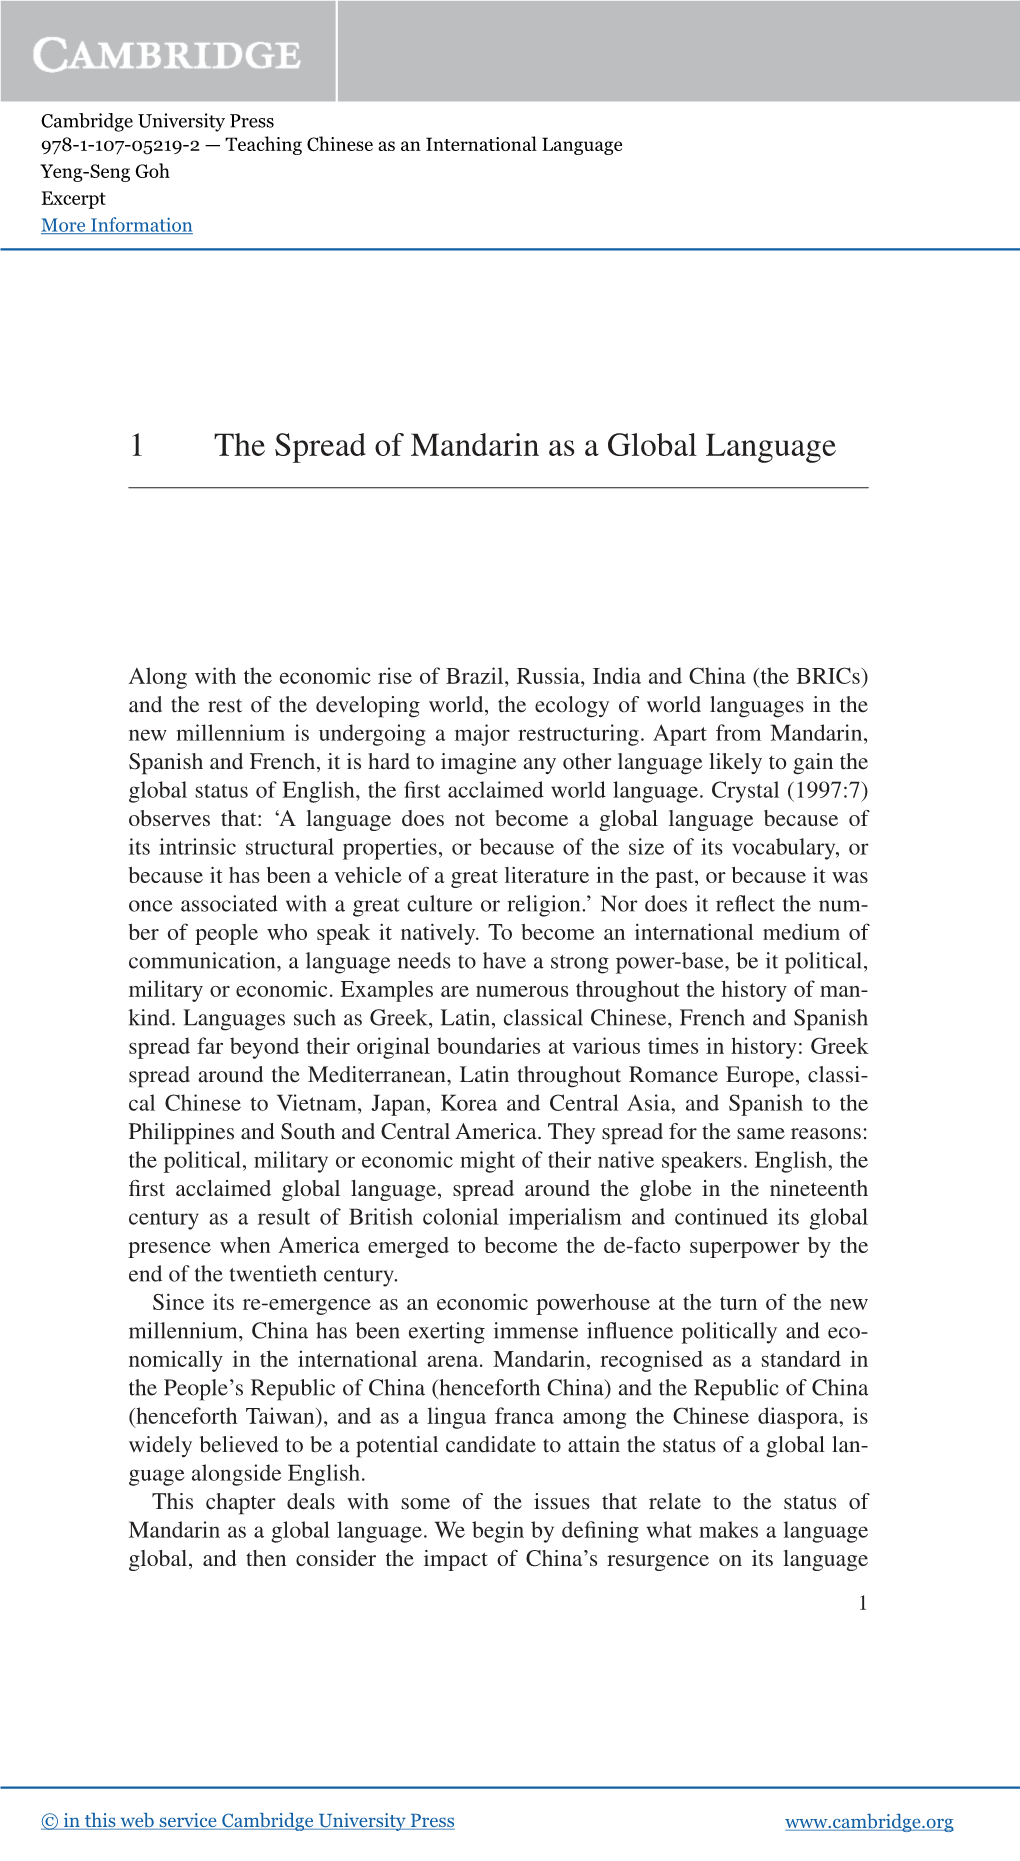 1 the Spread of Mandarin As a Global Language